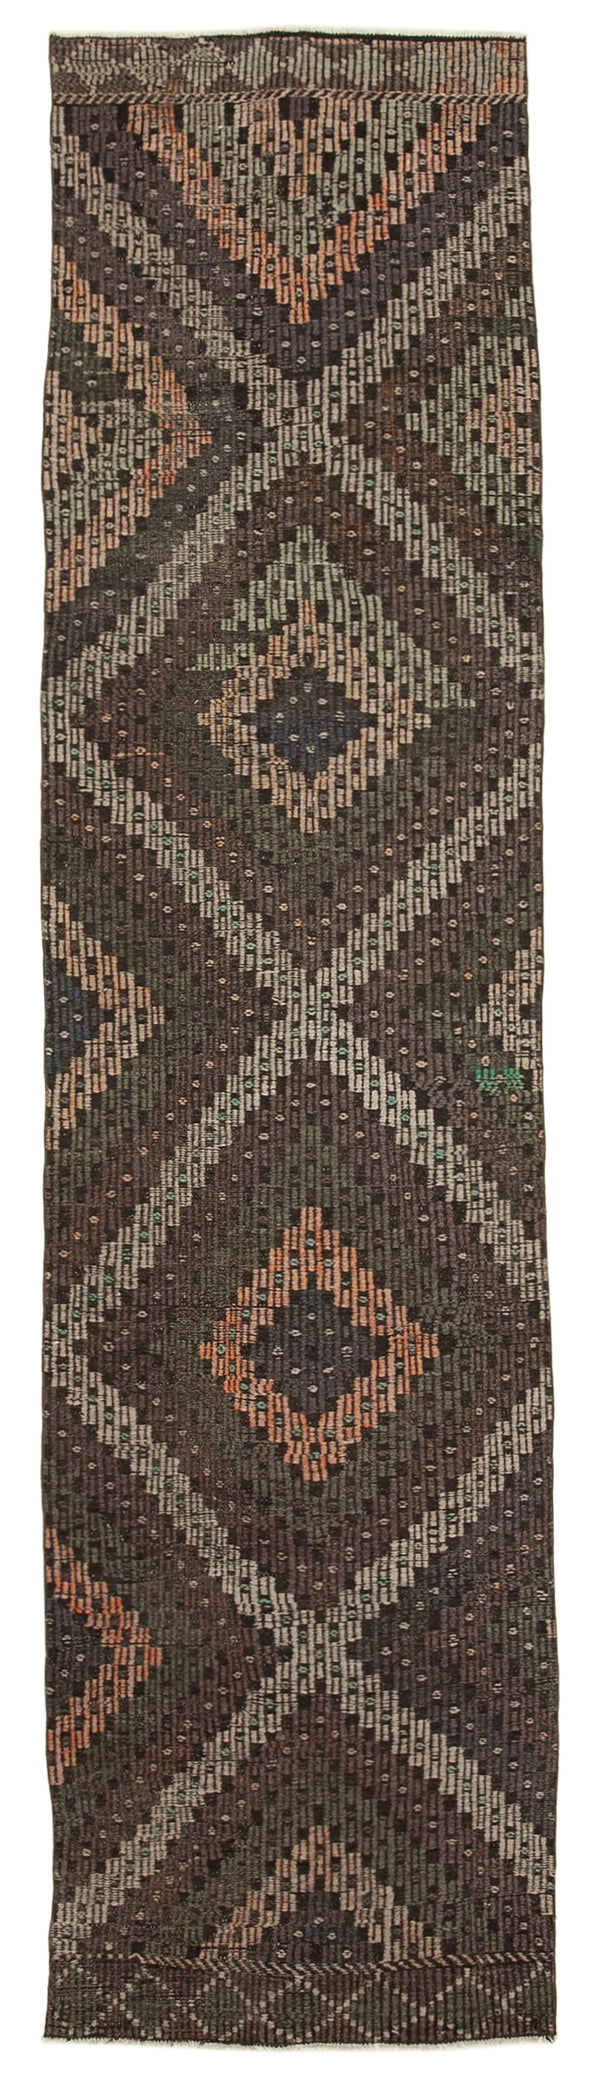 Handmade Kilim Runner > Design# OL-AC-29211 > Size: 2'-8" x 11'-4", Carpet Culture Rugs, Handmade Rugs, NYC Rugs, New Rugs, Shop Rugs, Rug Store, Outlet Rugs, SoHo Rugs, Rugs in USA